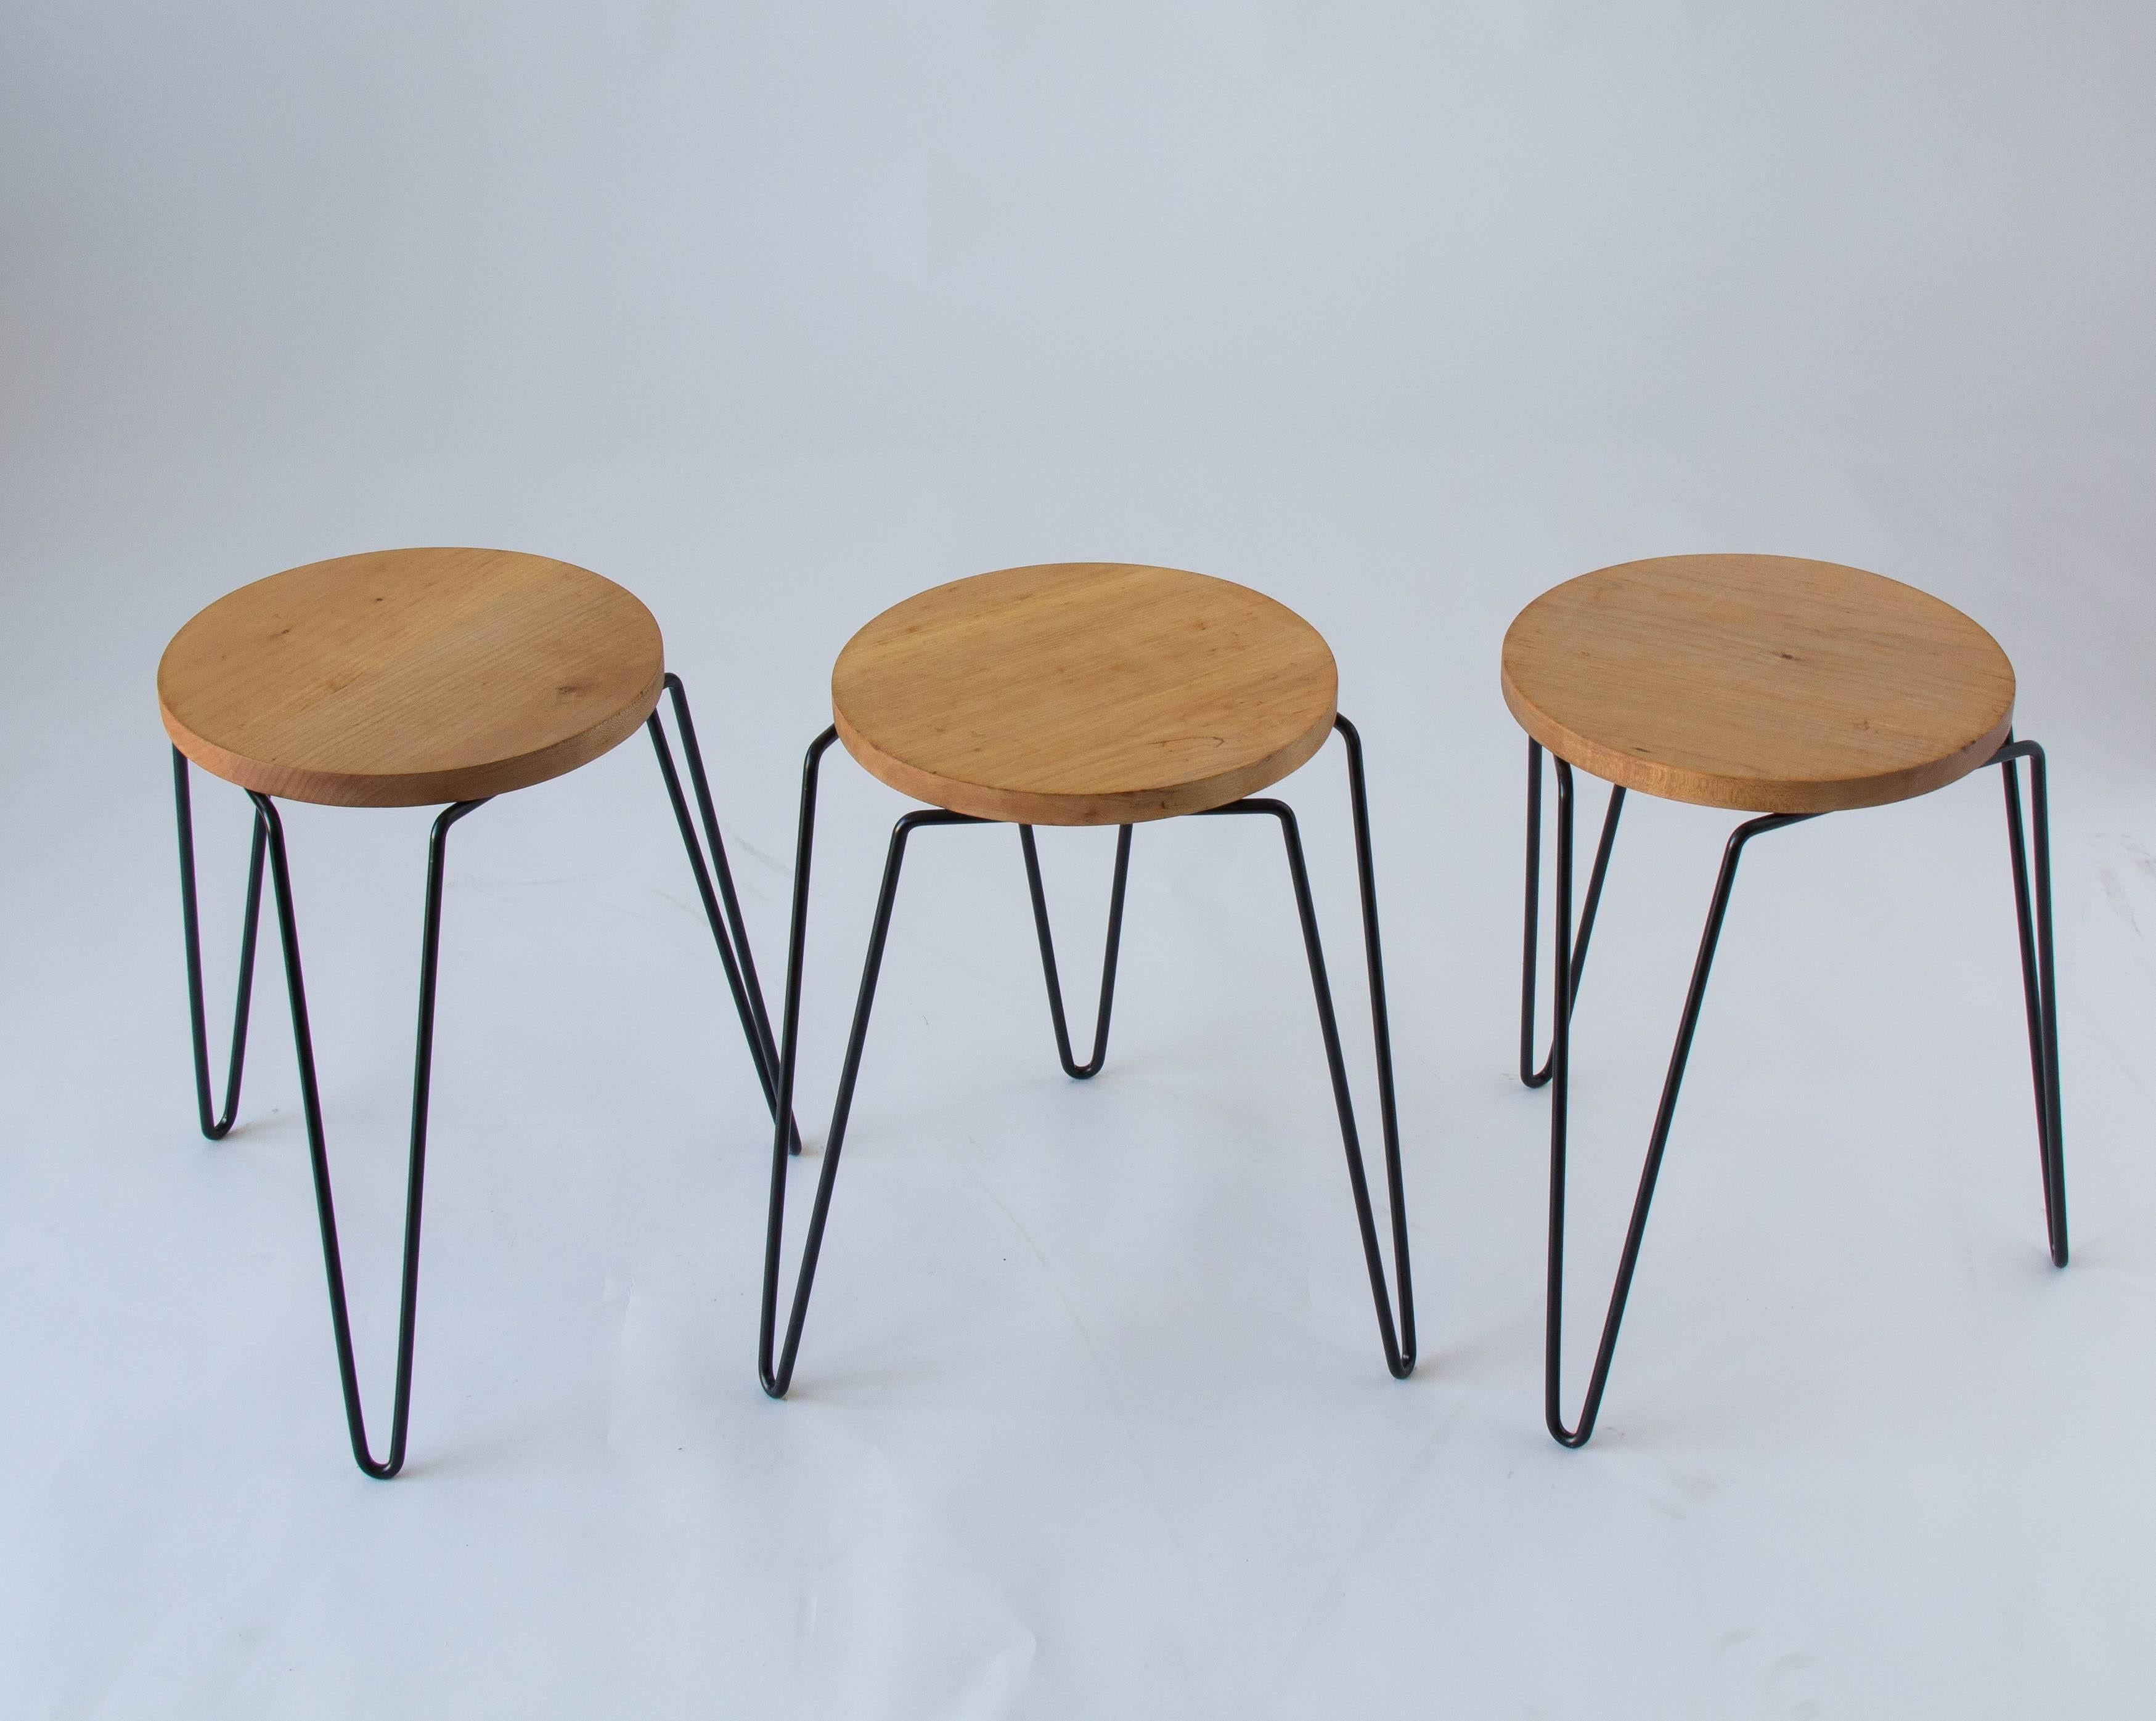 A set of three Florence Knoll-designed stools by Knoll Associates. The No. 75 stool has a round birch seat and wrought iron legs in a ‘hairpin’ style. The stools stack for ease of storage. 

Condition: Excellent restored condition; the seats have